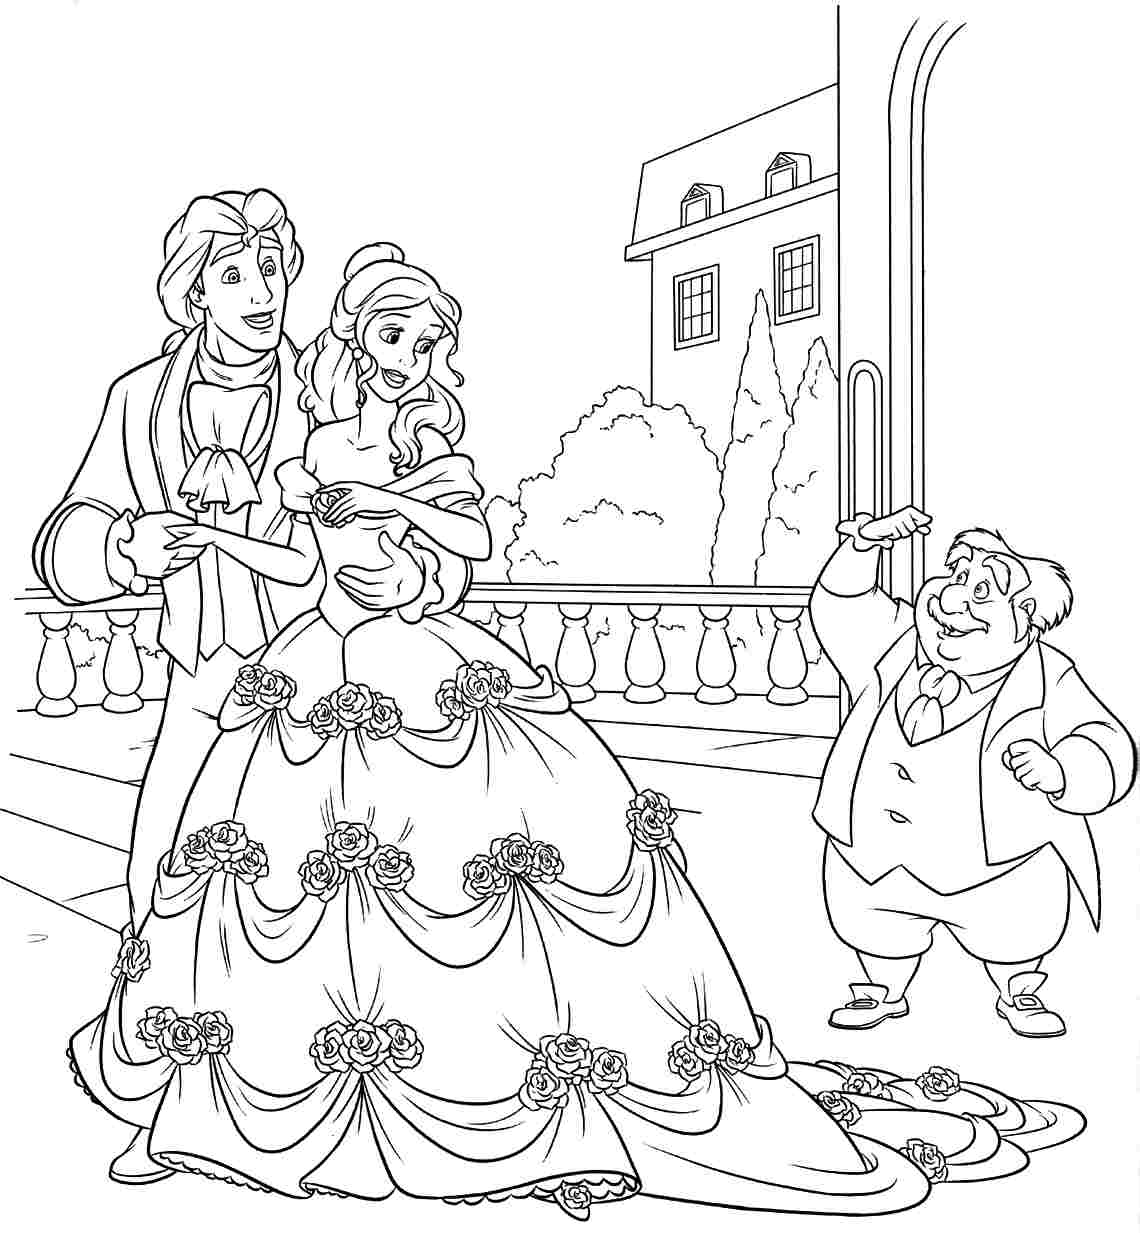 Beauty And The Beast Coloring Pages | Forcoloringpages.com - Coloring Home